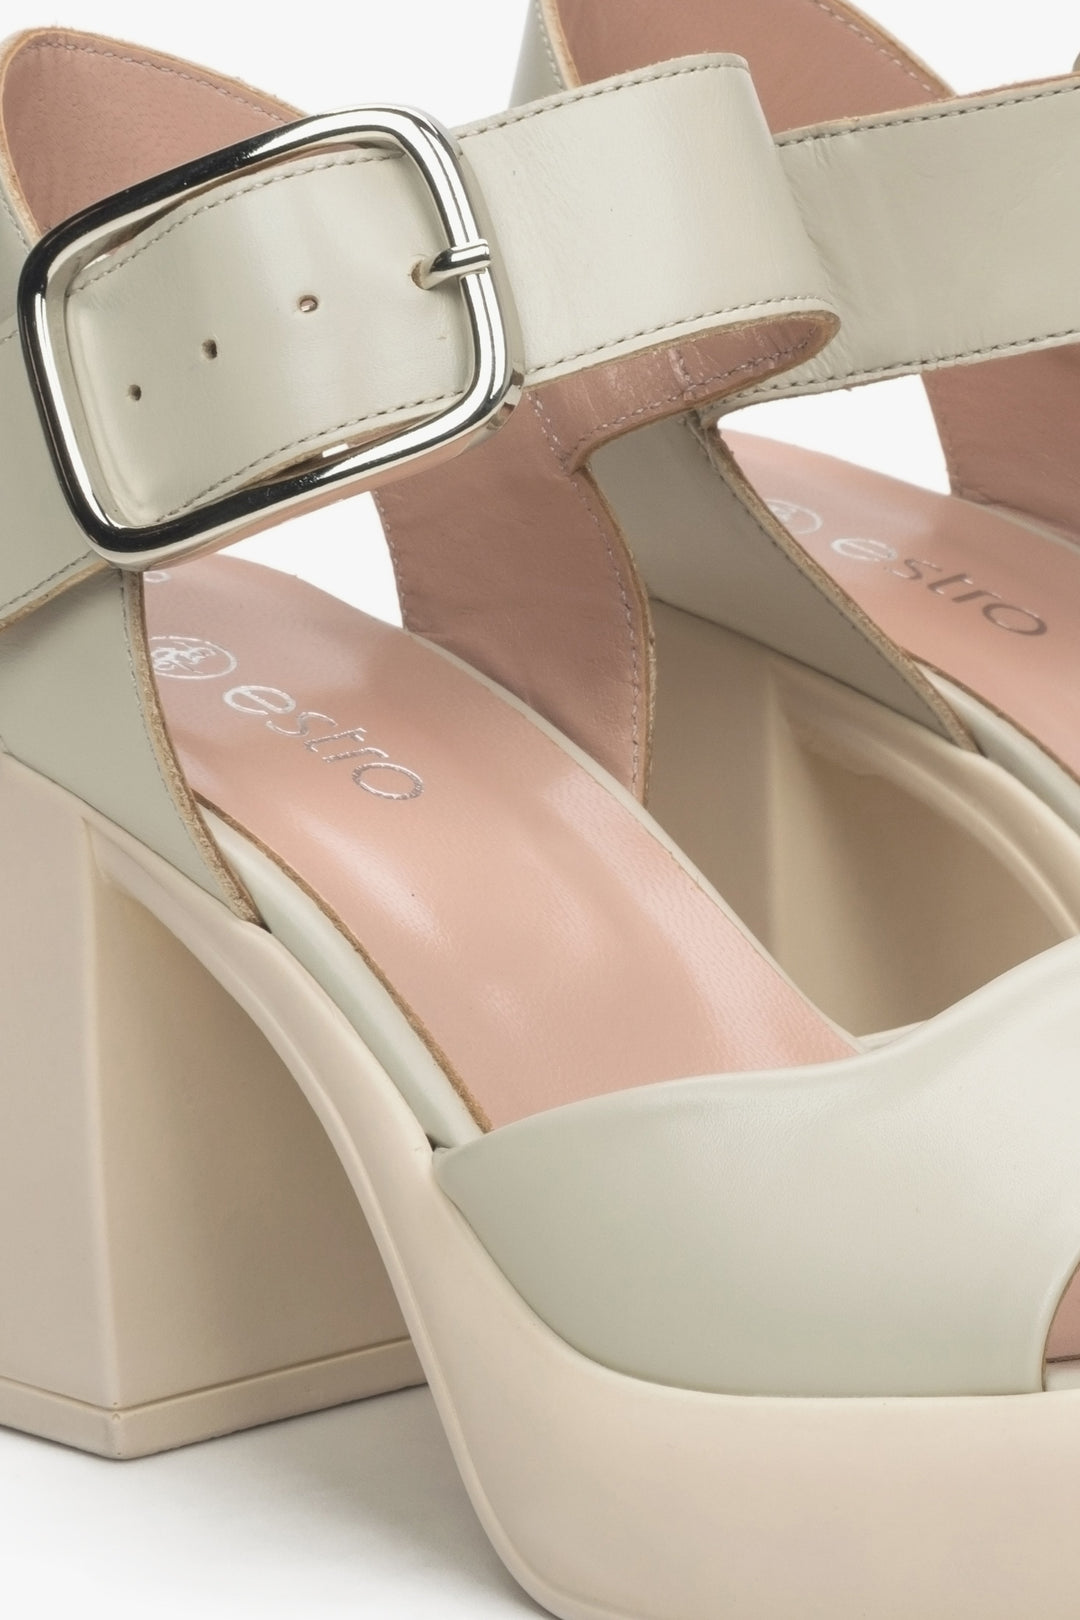 Women's beige-grey sandals with a stable heel by Estro - close-up on the detail.